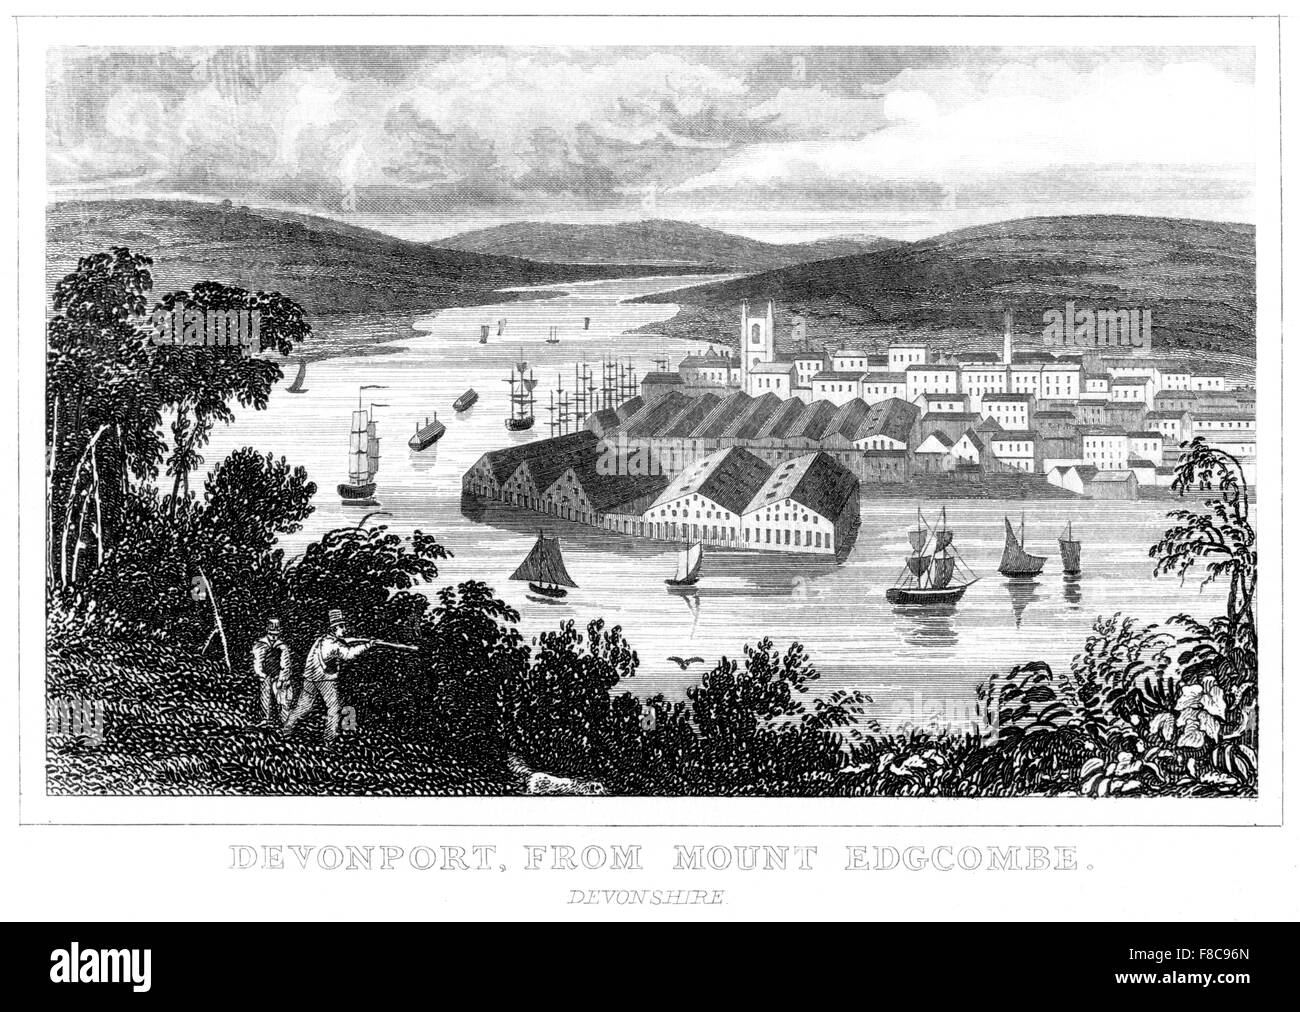 An engraving of Devonport, from Mount Edgcombe, Devonshire scanned at high resolution from a book printed around 1850. Stock Photo